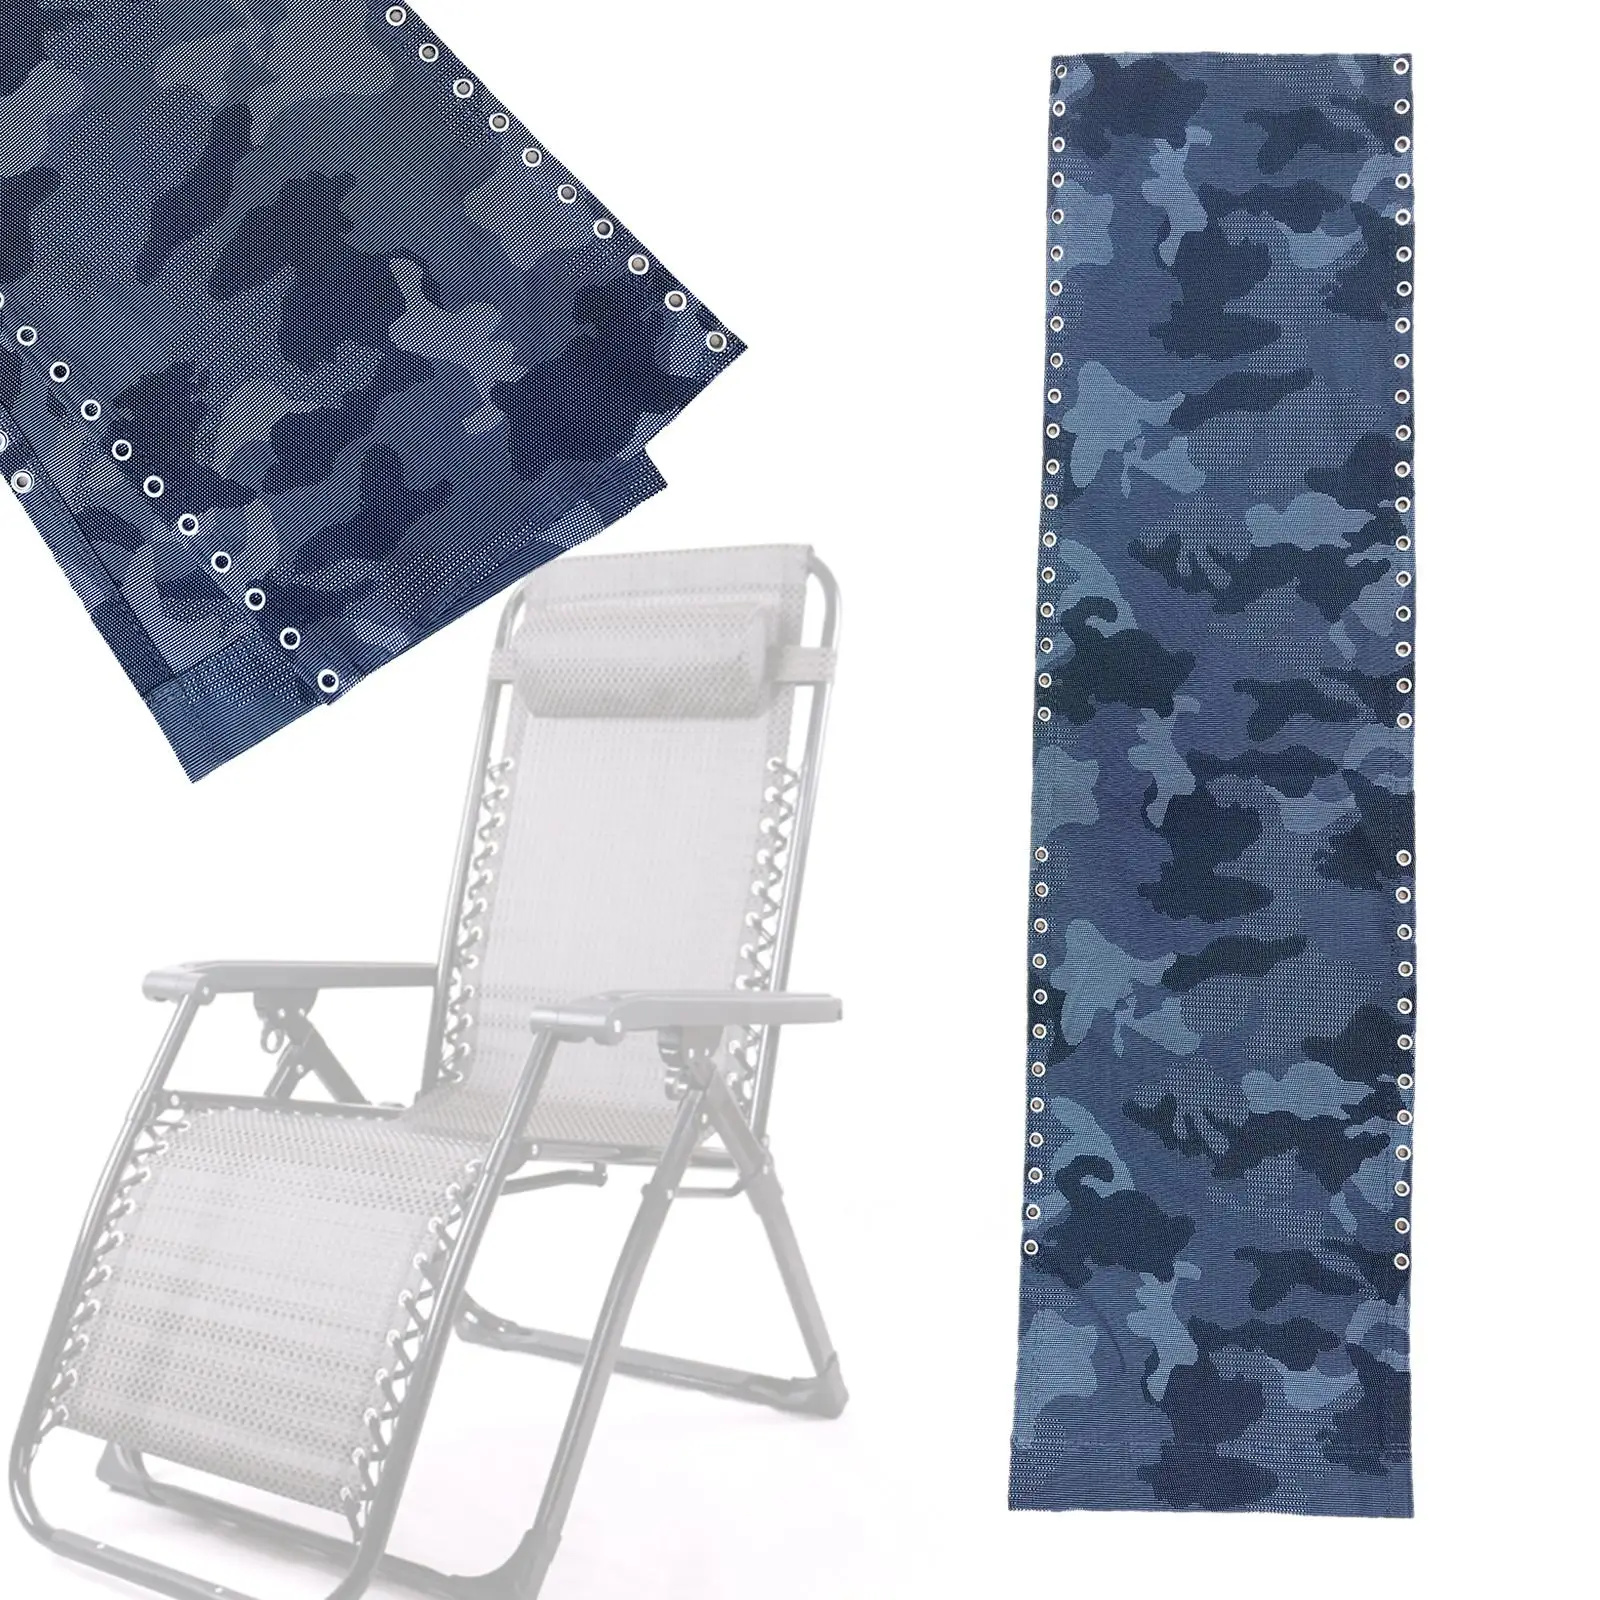 Recliner Chair Cloth Chair Accessories Lounge Chair Cloth for Outdoor Deck Chairs